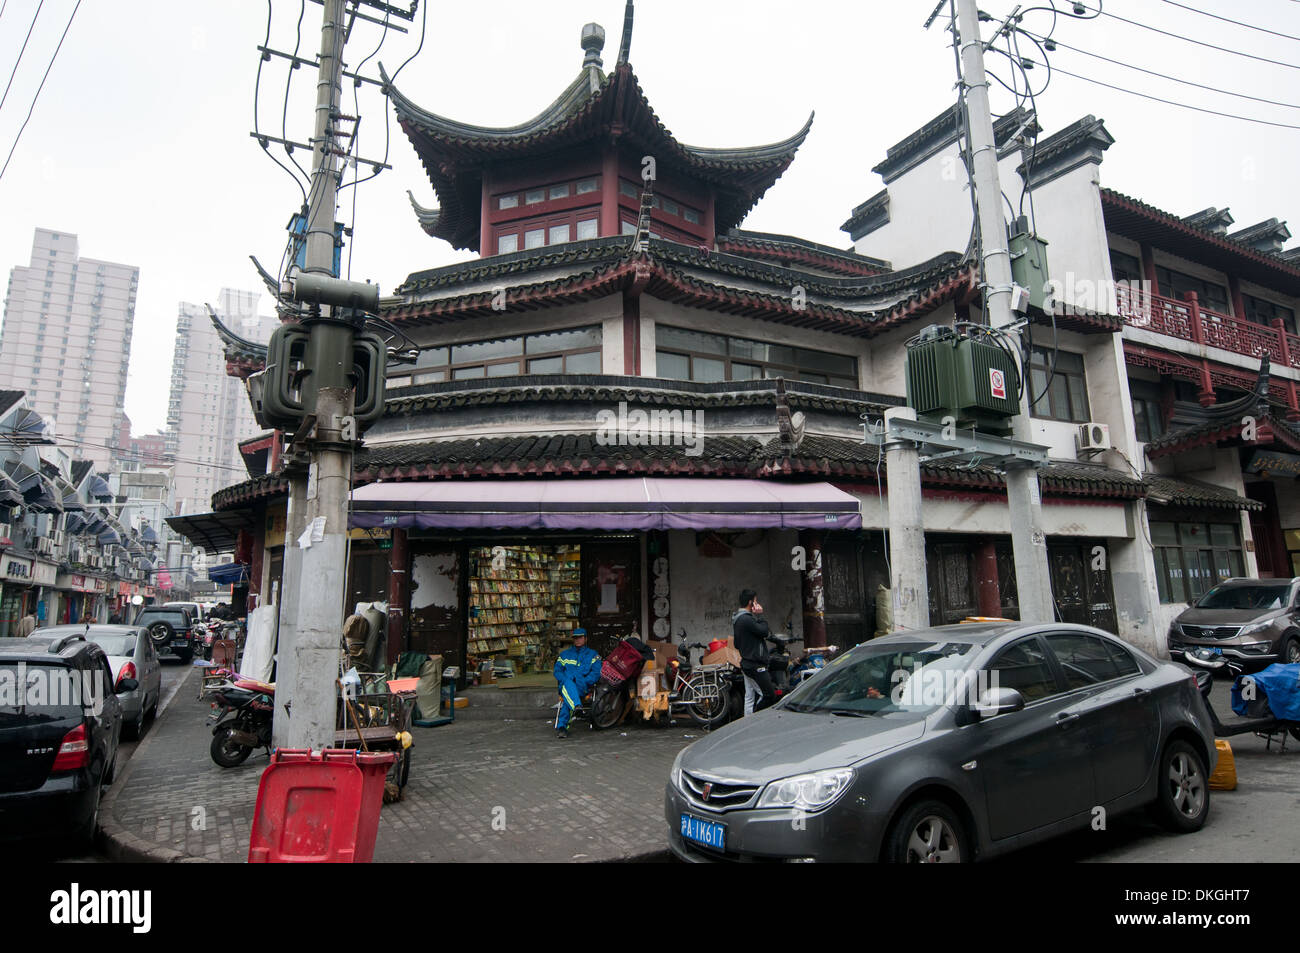 Wen Miao Temple also called Shanghai Confucian Temple at No. 215 Wenmiao Road, Huangpu District, Shanghai, China Stock Photo